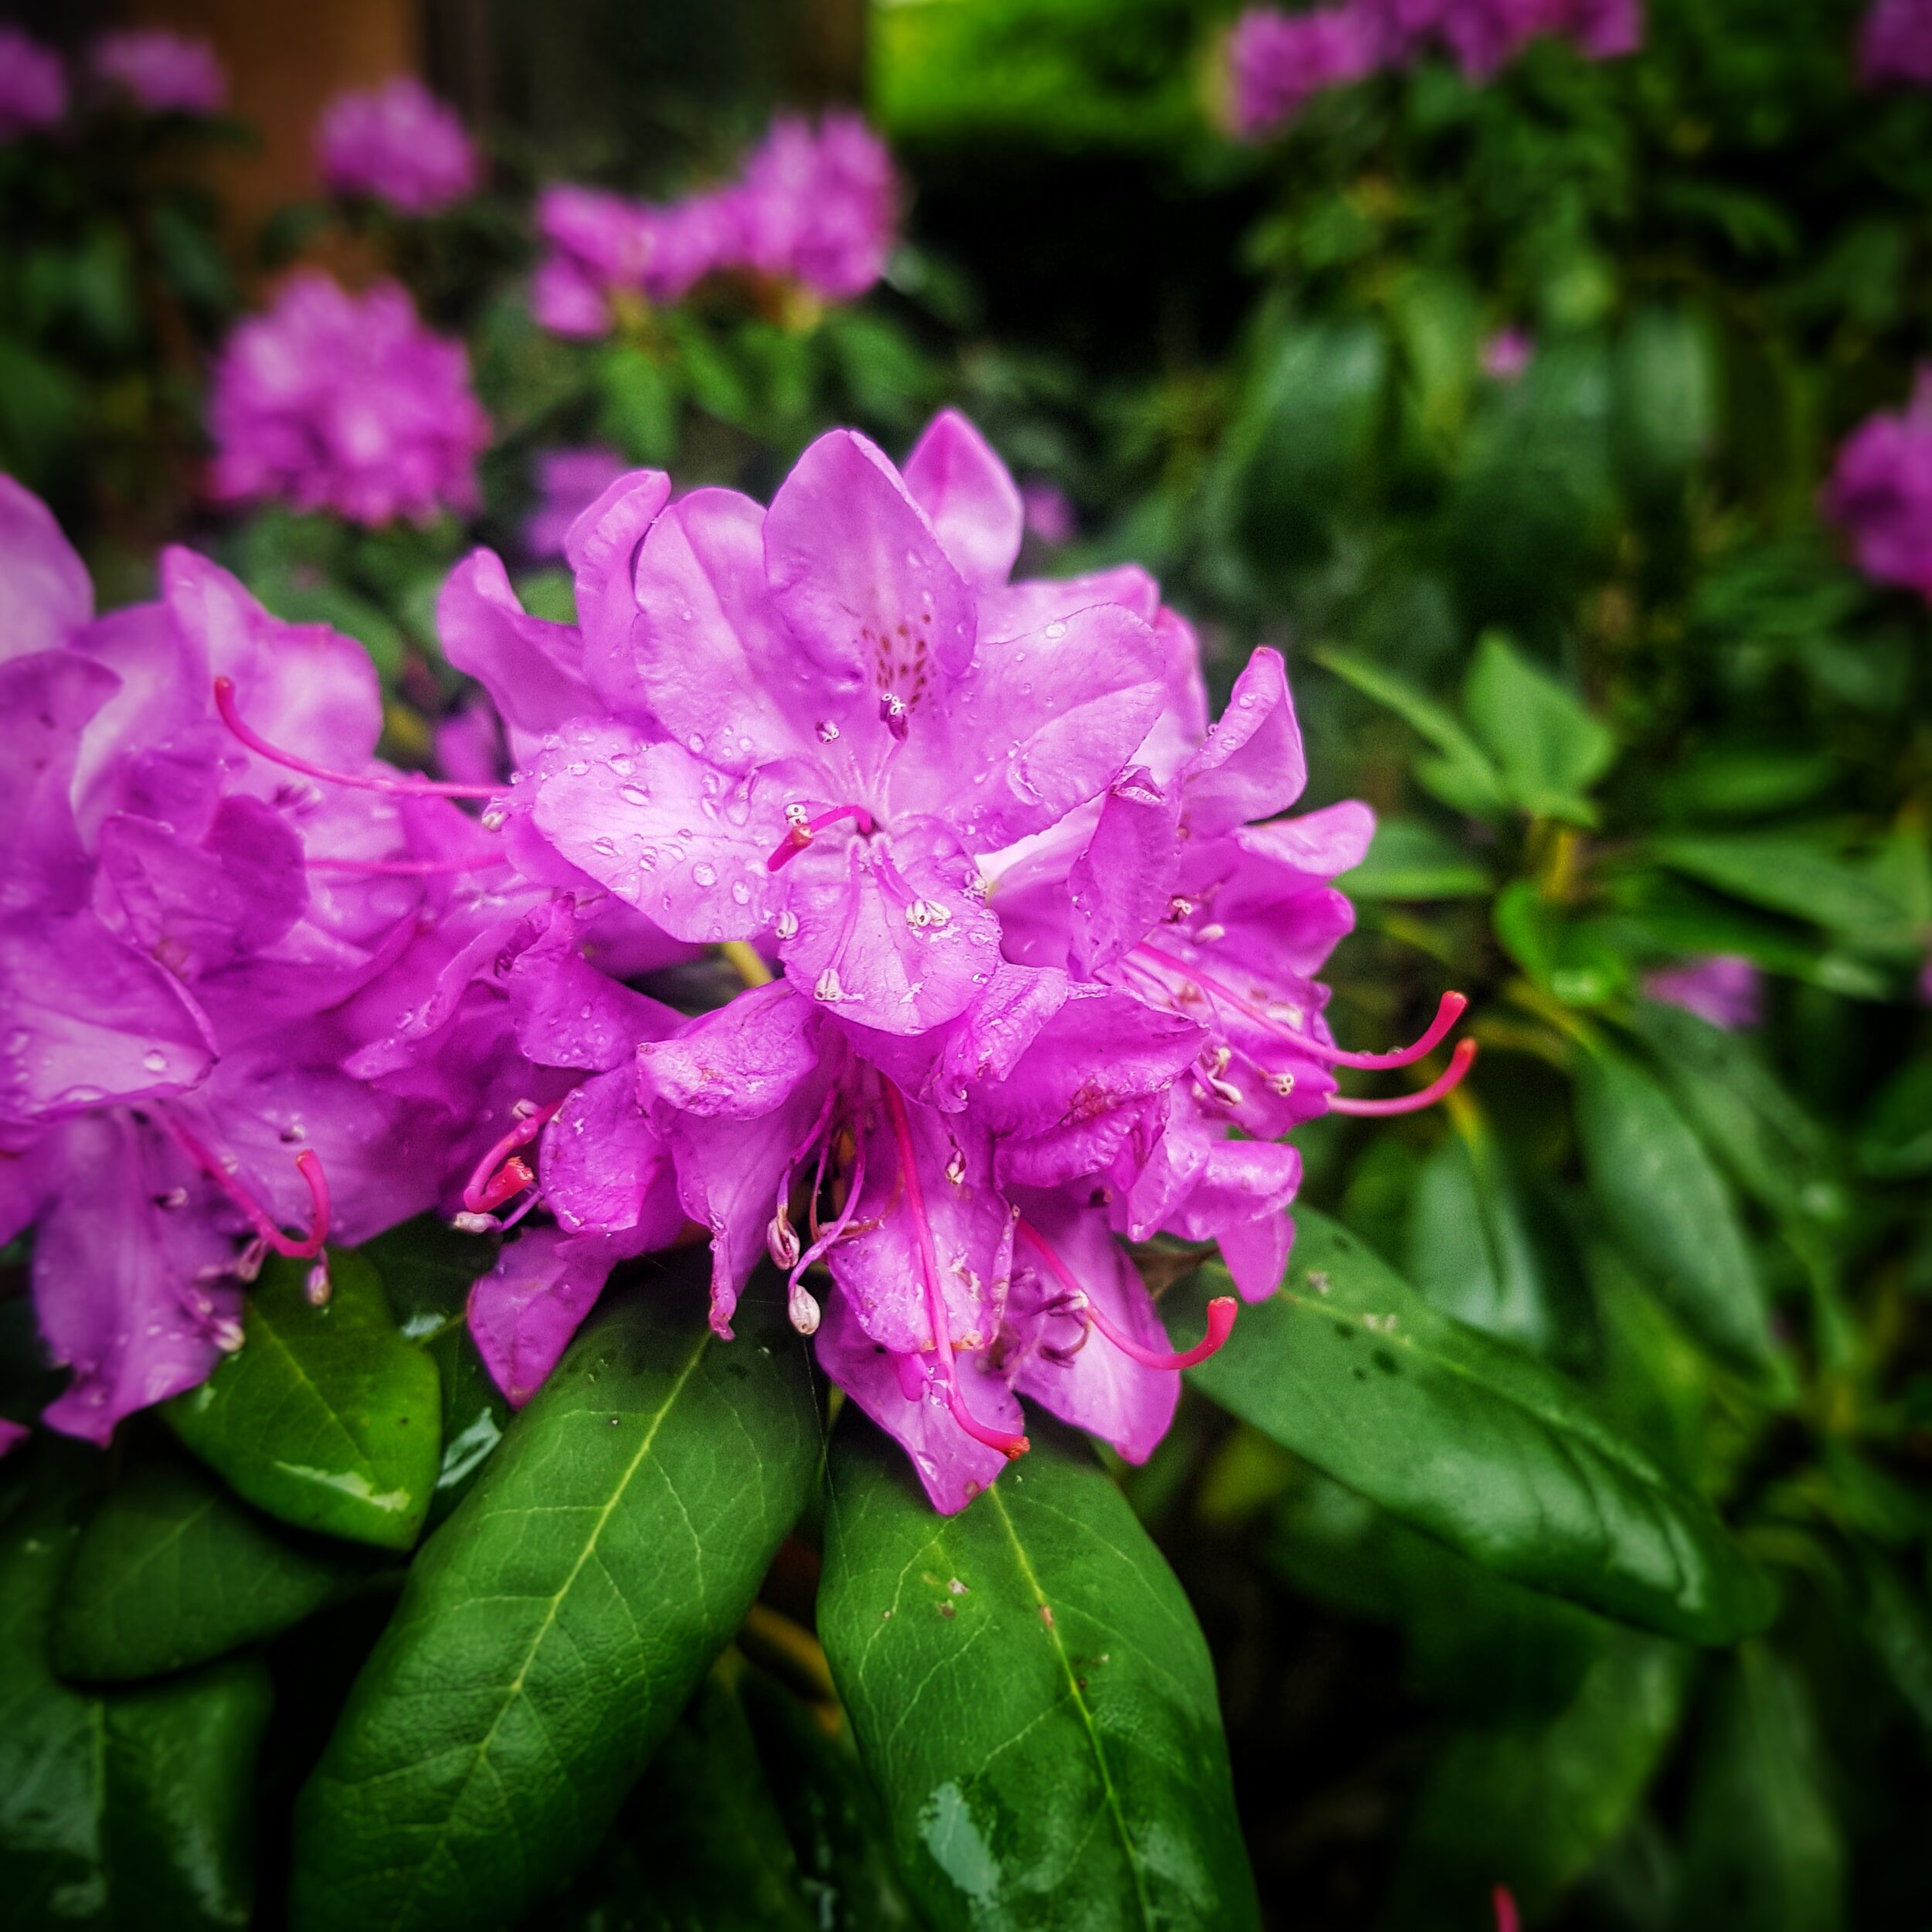 Day 164 - June 12: Rhododendron in the rain